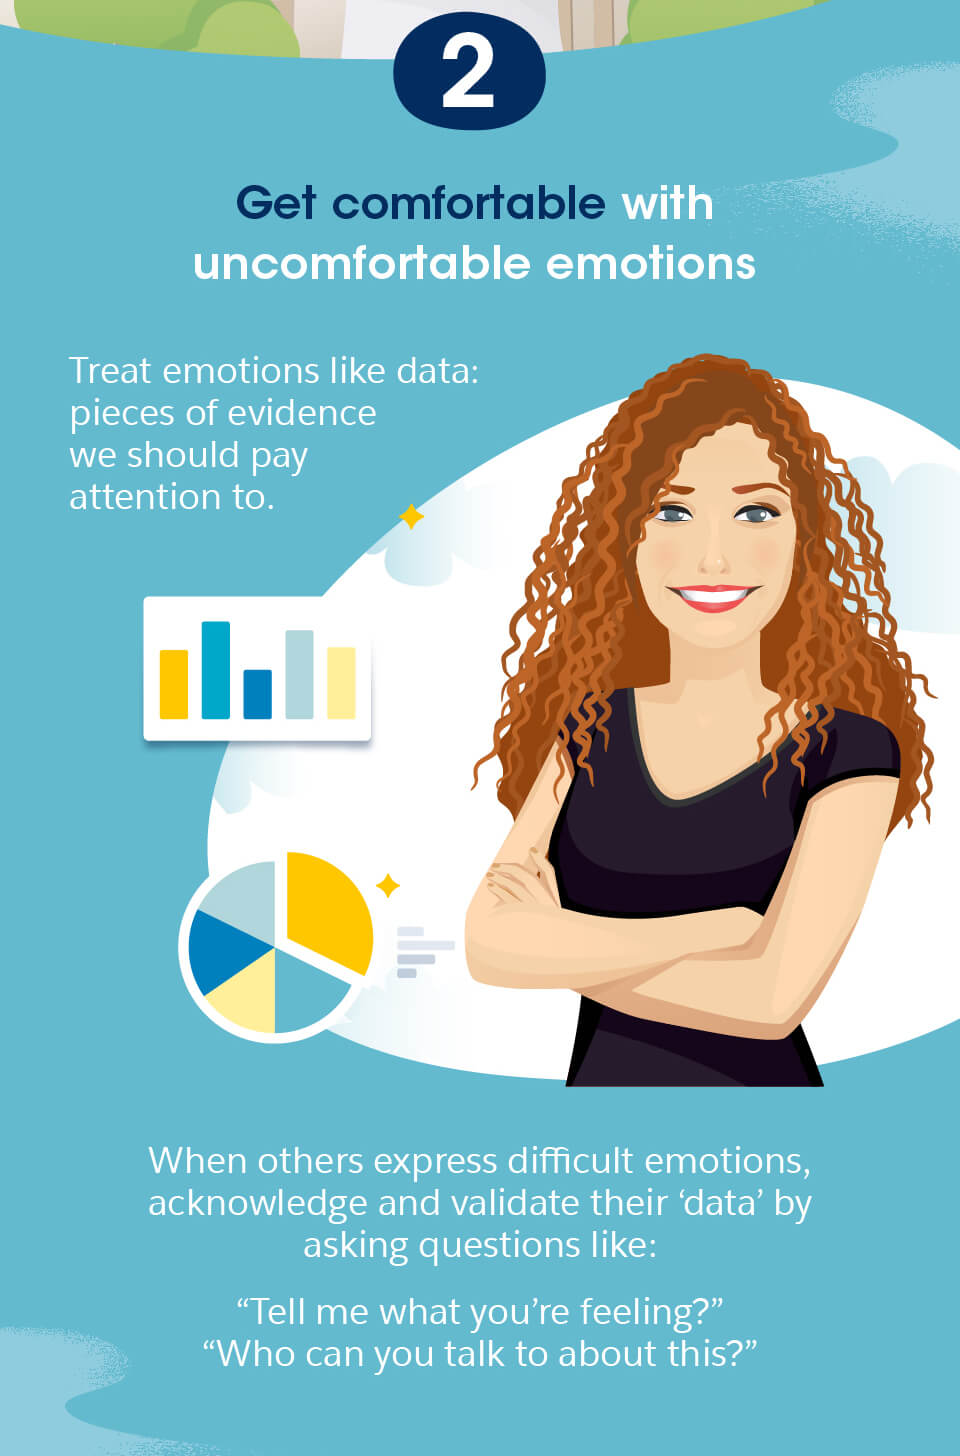 Get comfortable with uncomfortable emotions